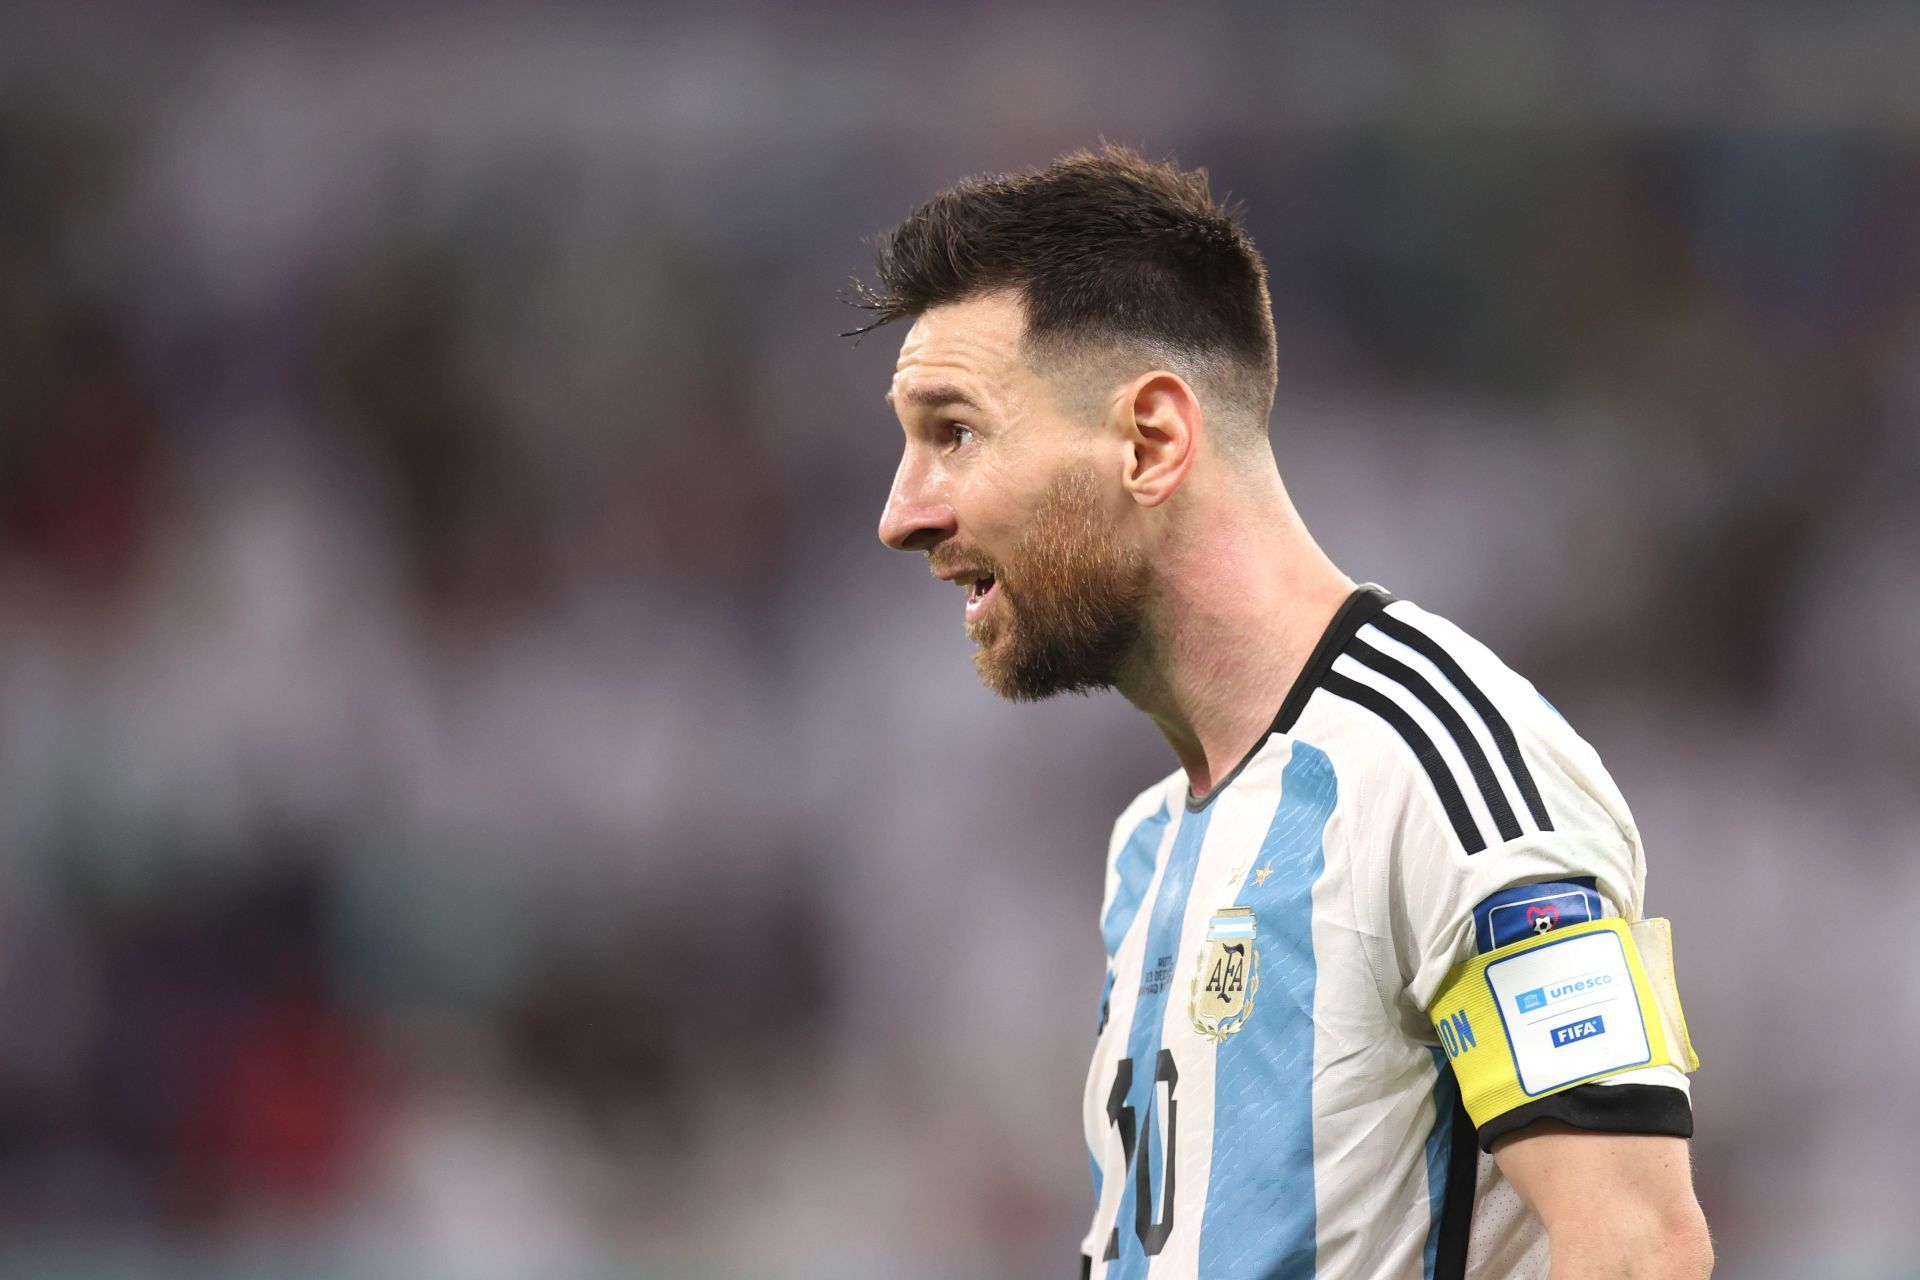 Lionel Messi has lit up the 2022 FIFA World Cup.